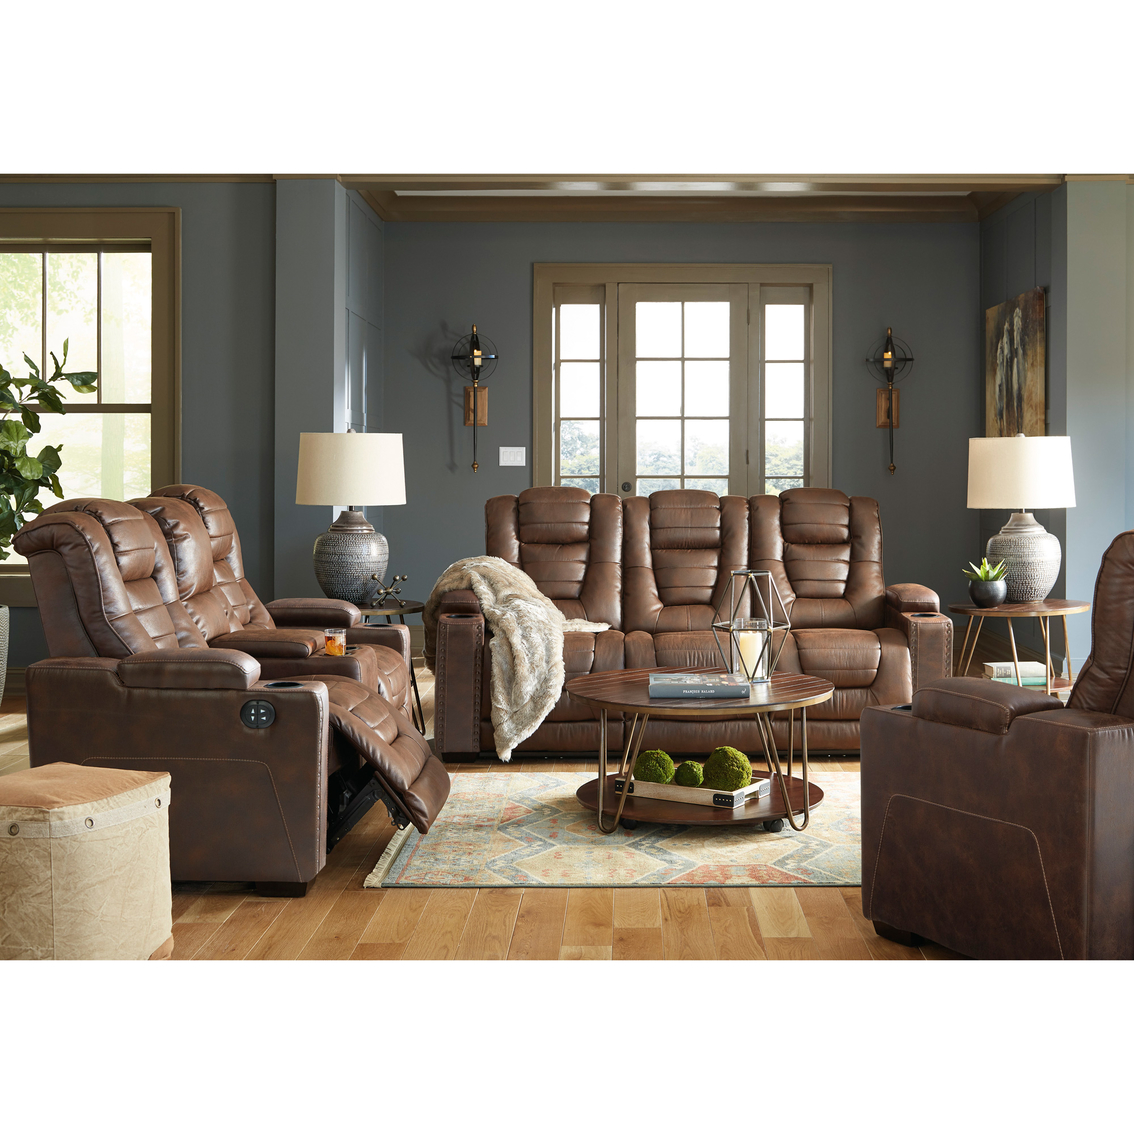 Signature Design by Ashley Owner's Box Power Recliner with Adjustable Headrest - Image 7 of 10